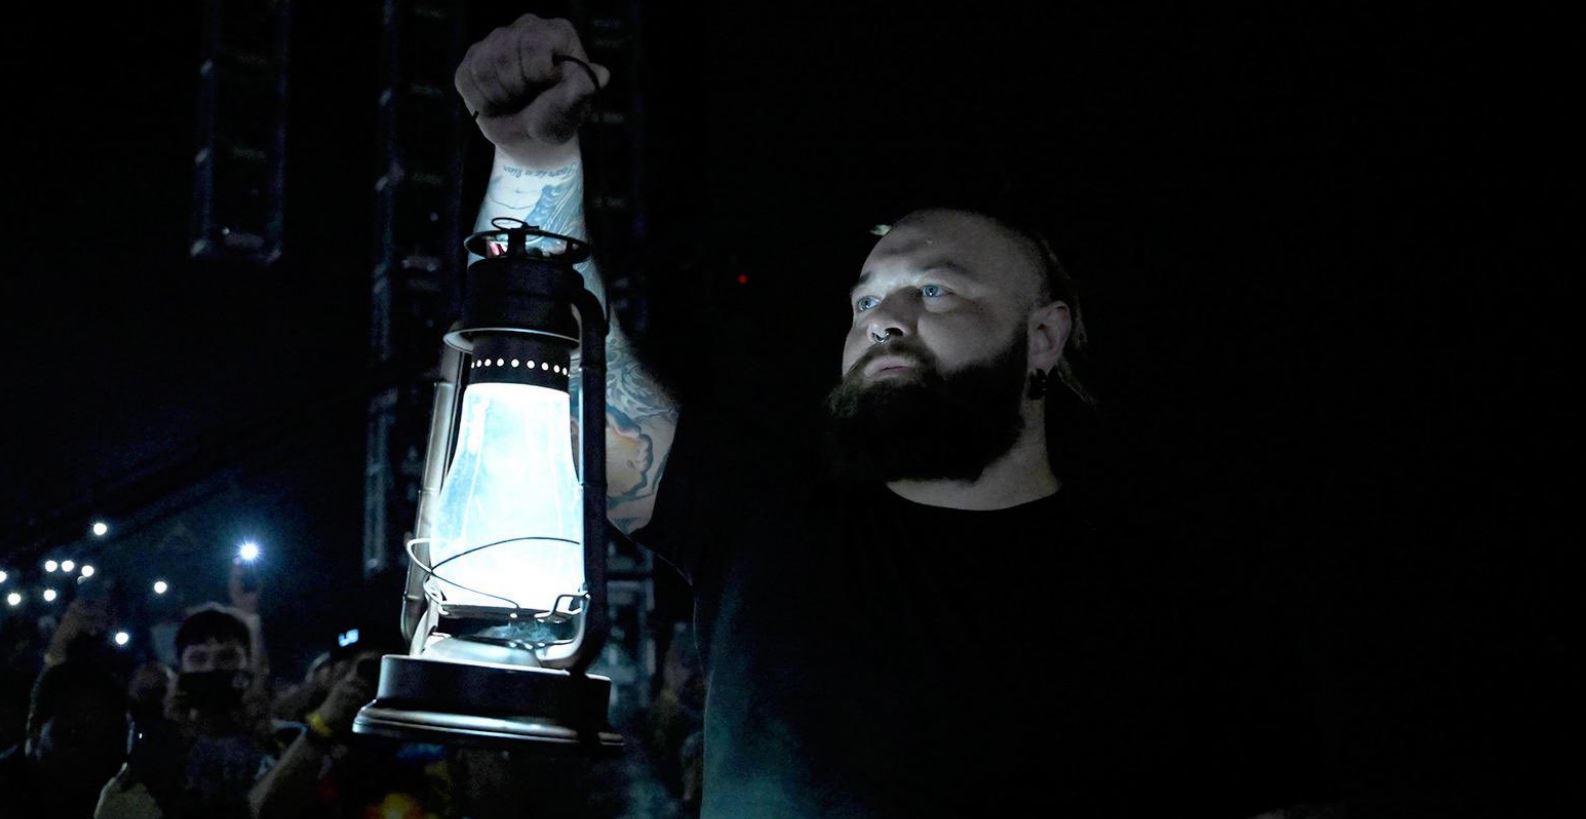 Tributes Paid To Bray Wyatt And Terry Funk On WWE SmackDown